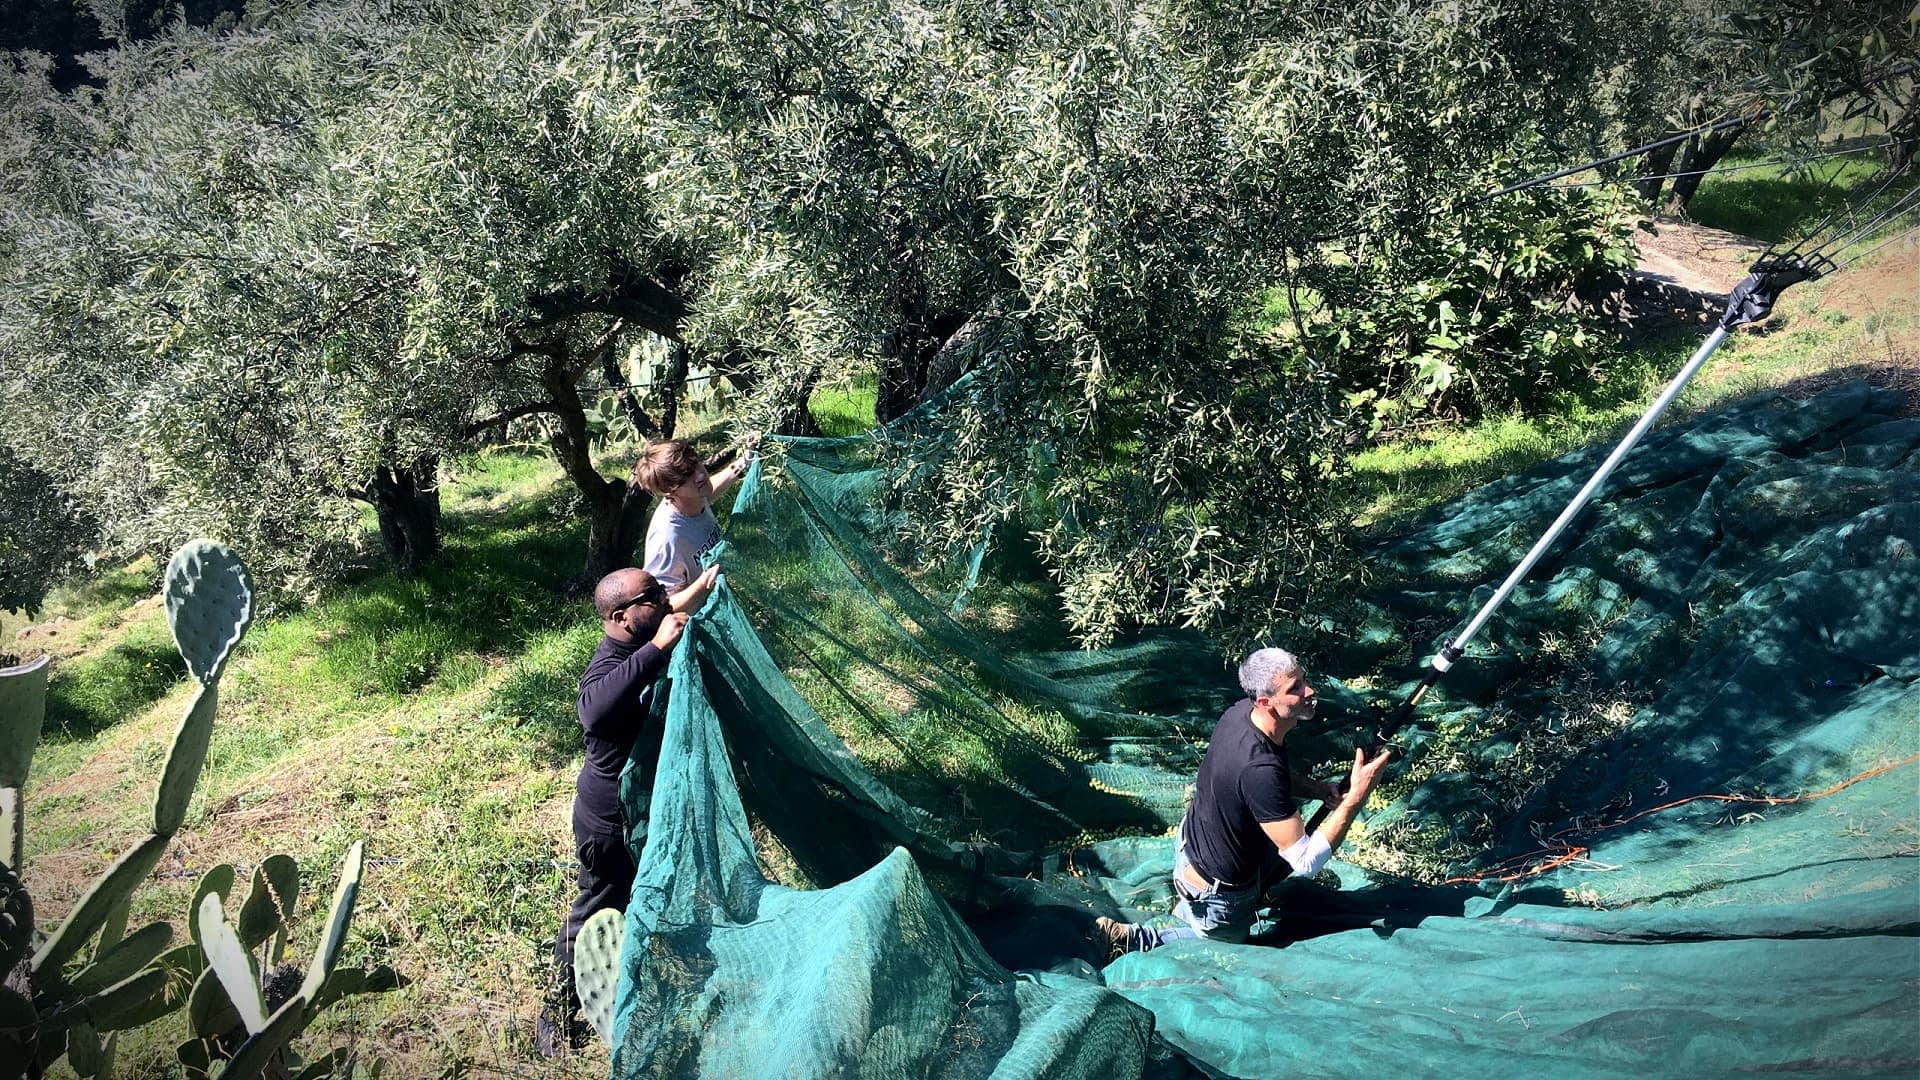 profiles-the-best-olive-oils-production-europe-acclaimed-calabrian-producer-shares-insights-on-blending-organic-farming-and-oleotourism-olive-oil-times